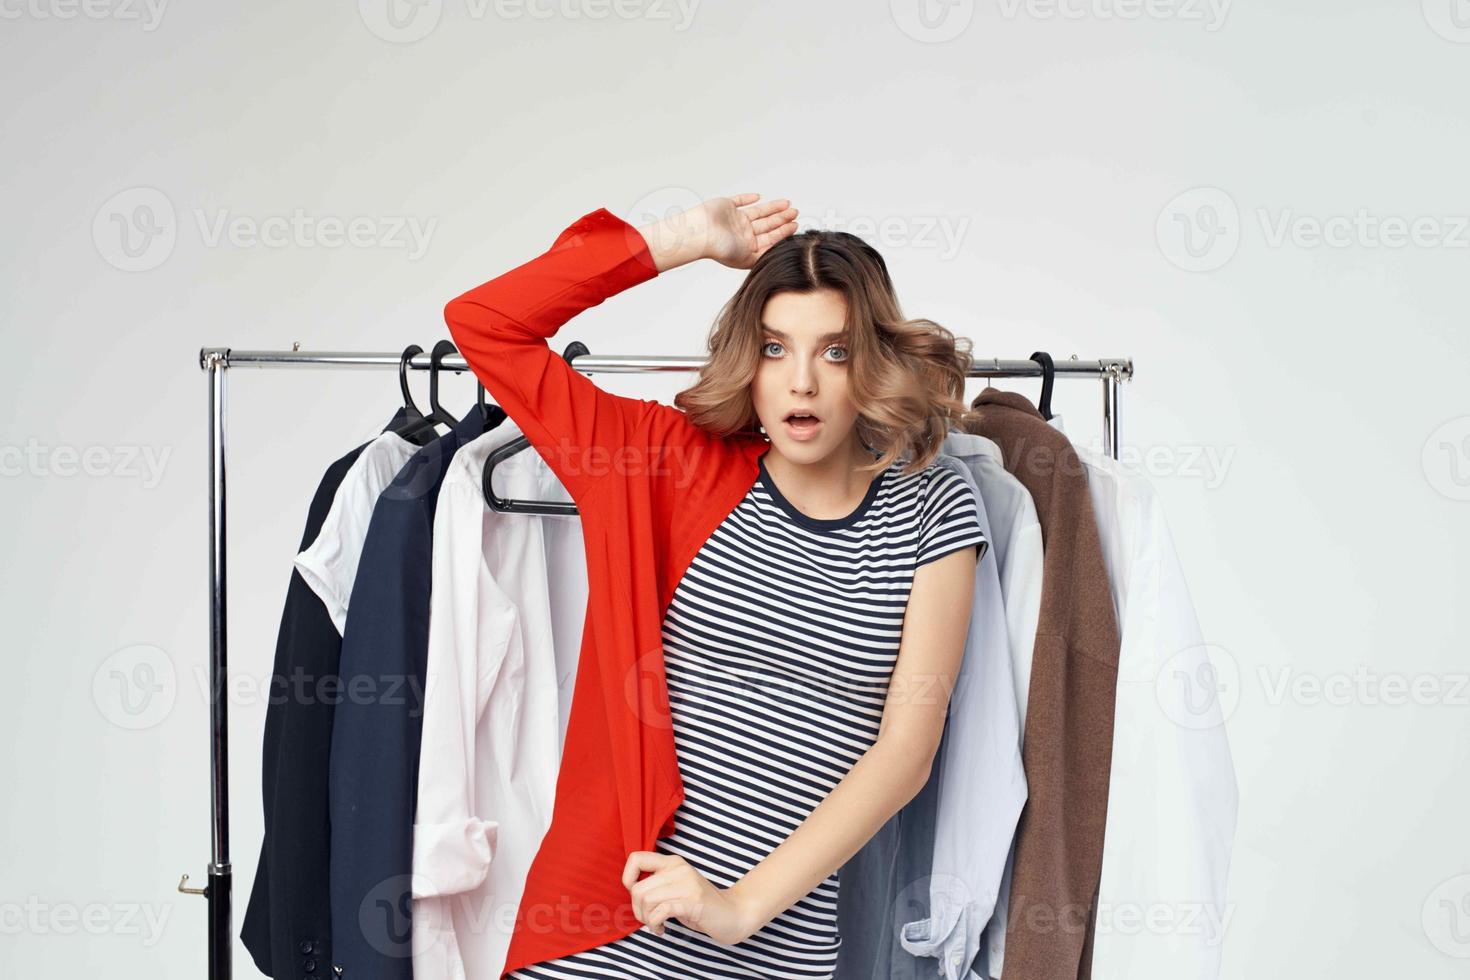 beautiful woman clothes hanger shopping light background photo